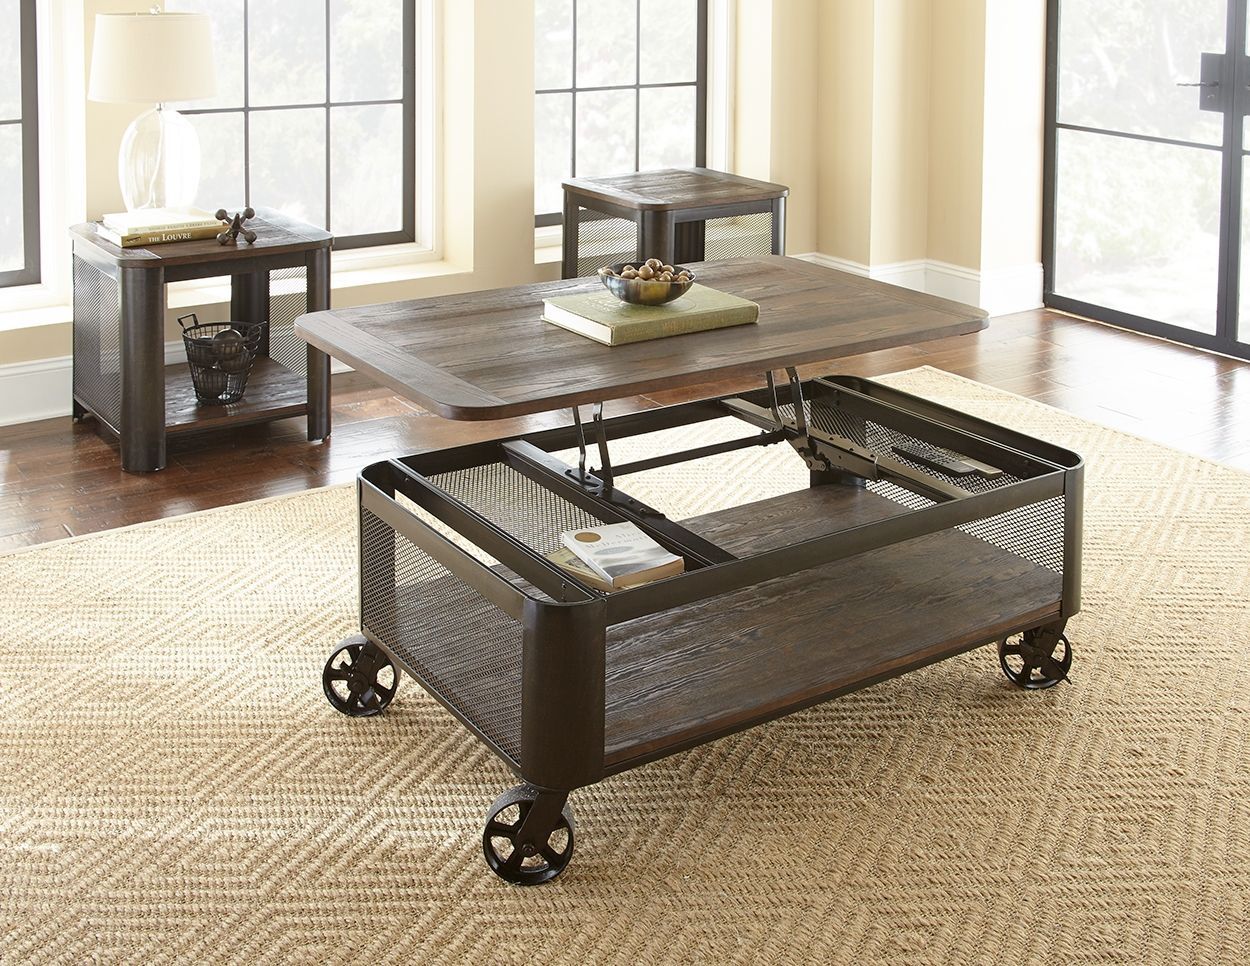 Clint Lift Top Table With Casters | Coffee Table With Wheels, Coffee Intended For Coffee Tables With Casters (View 9 of 21)